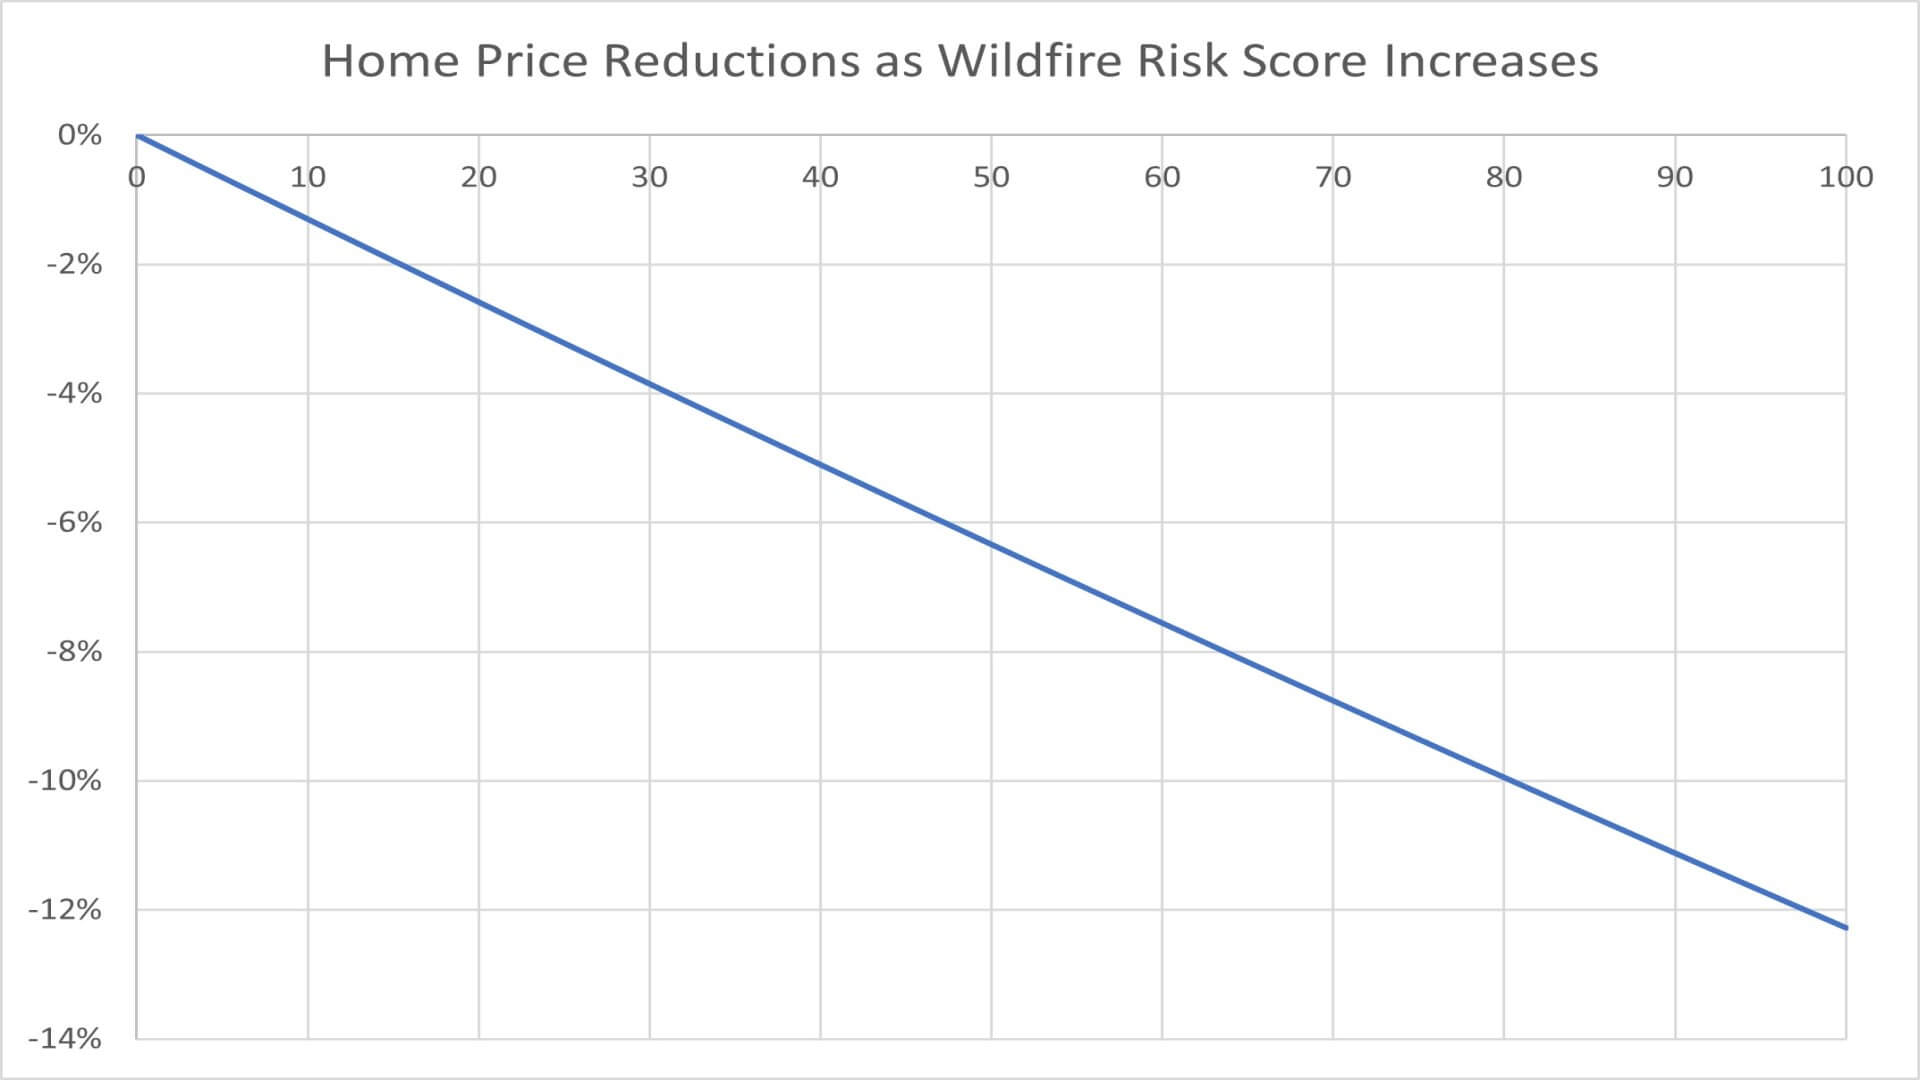 Home value declines as the Wildfire Risk Score increases in San Diego County